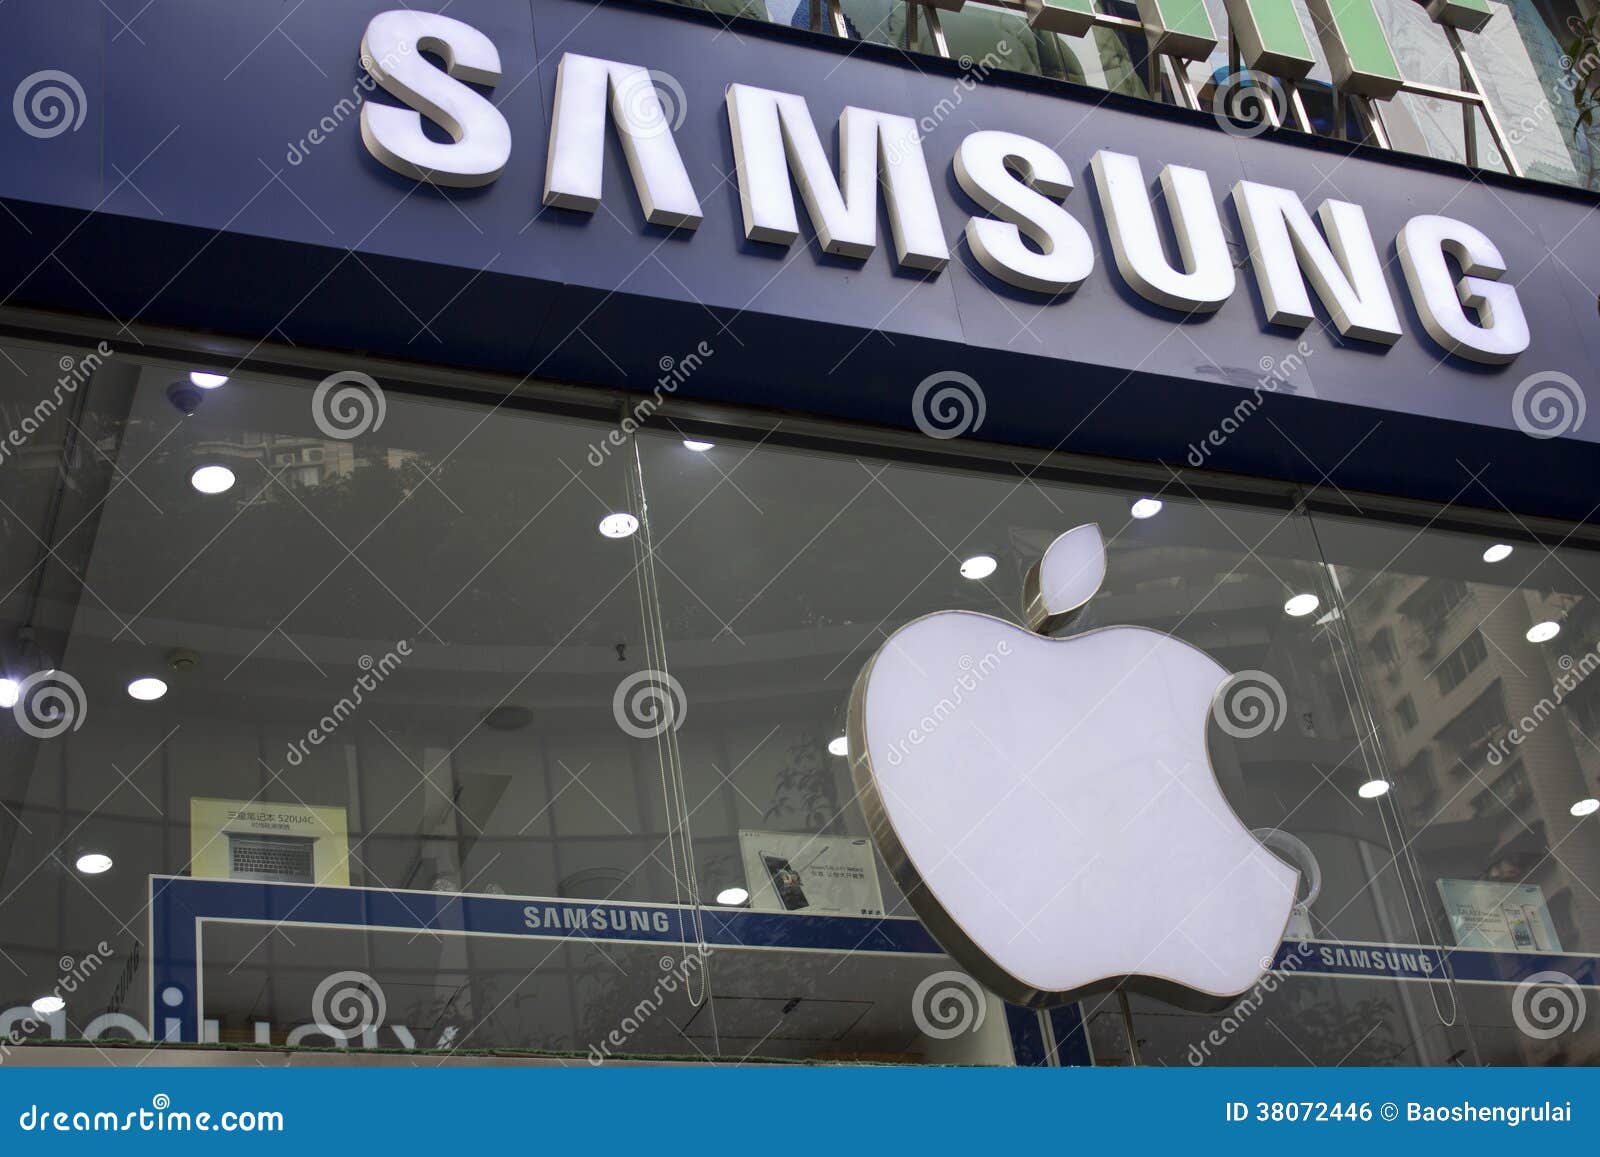 951 Apple Samsung Logo Images, Stock Photos, 3D objects, & Vectors